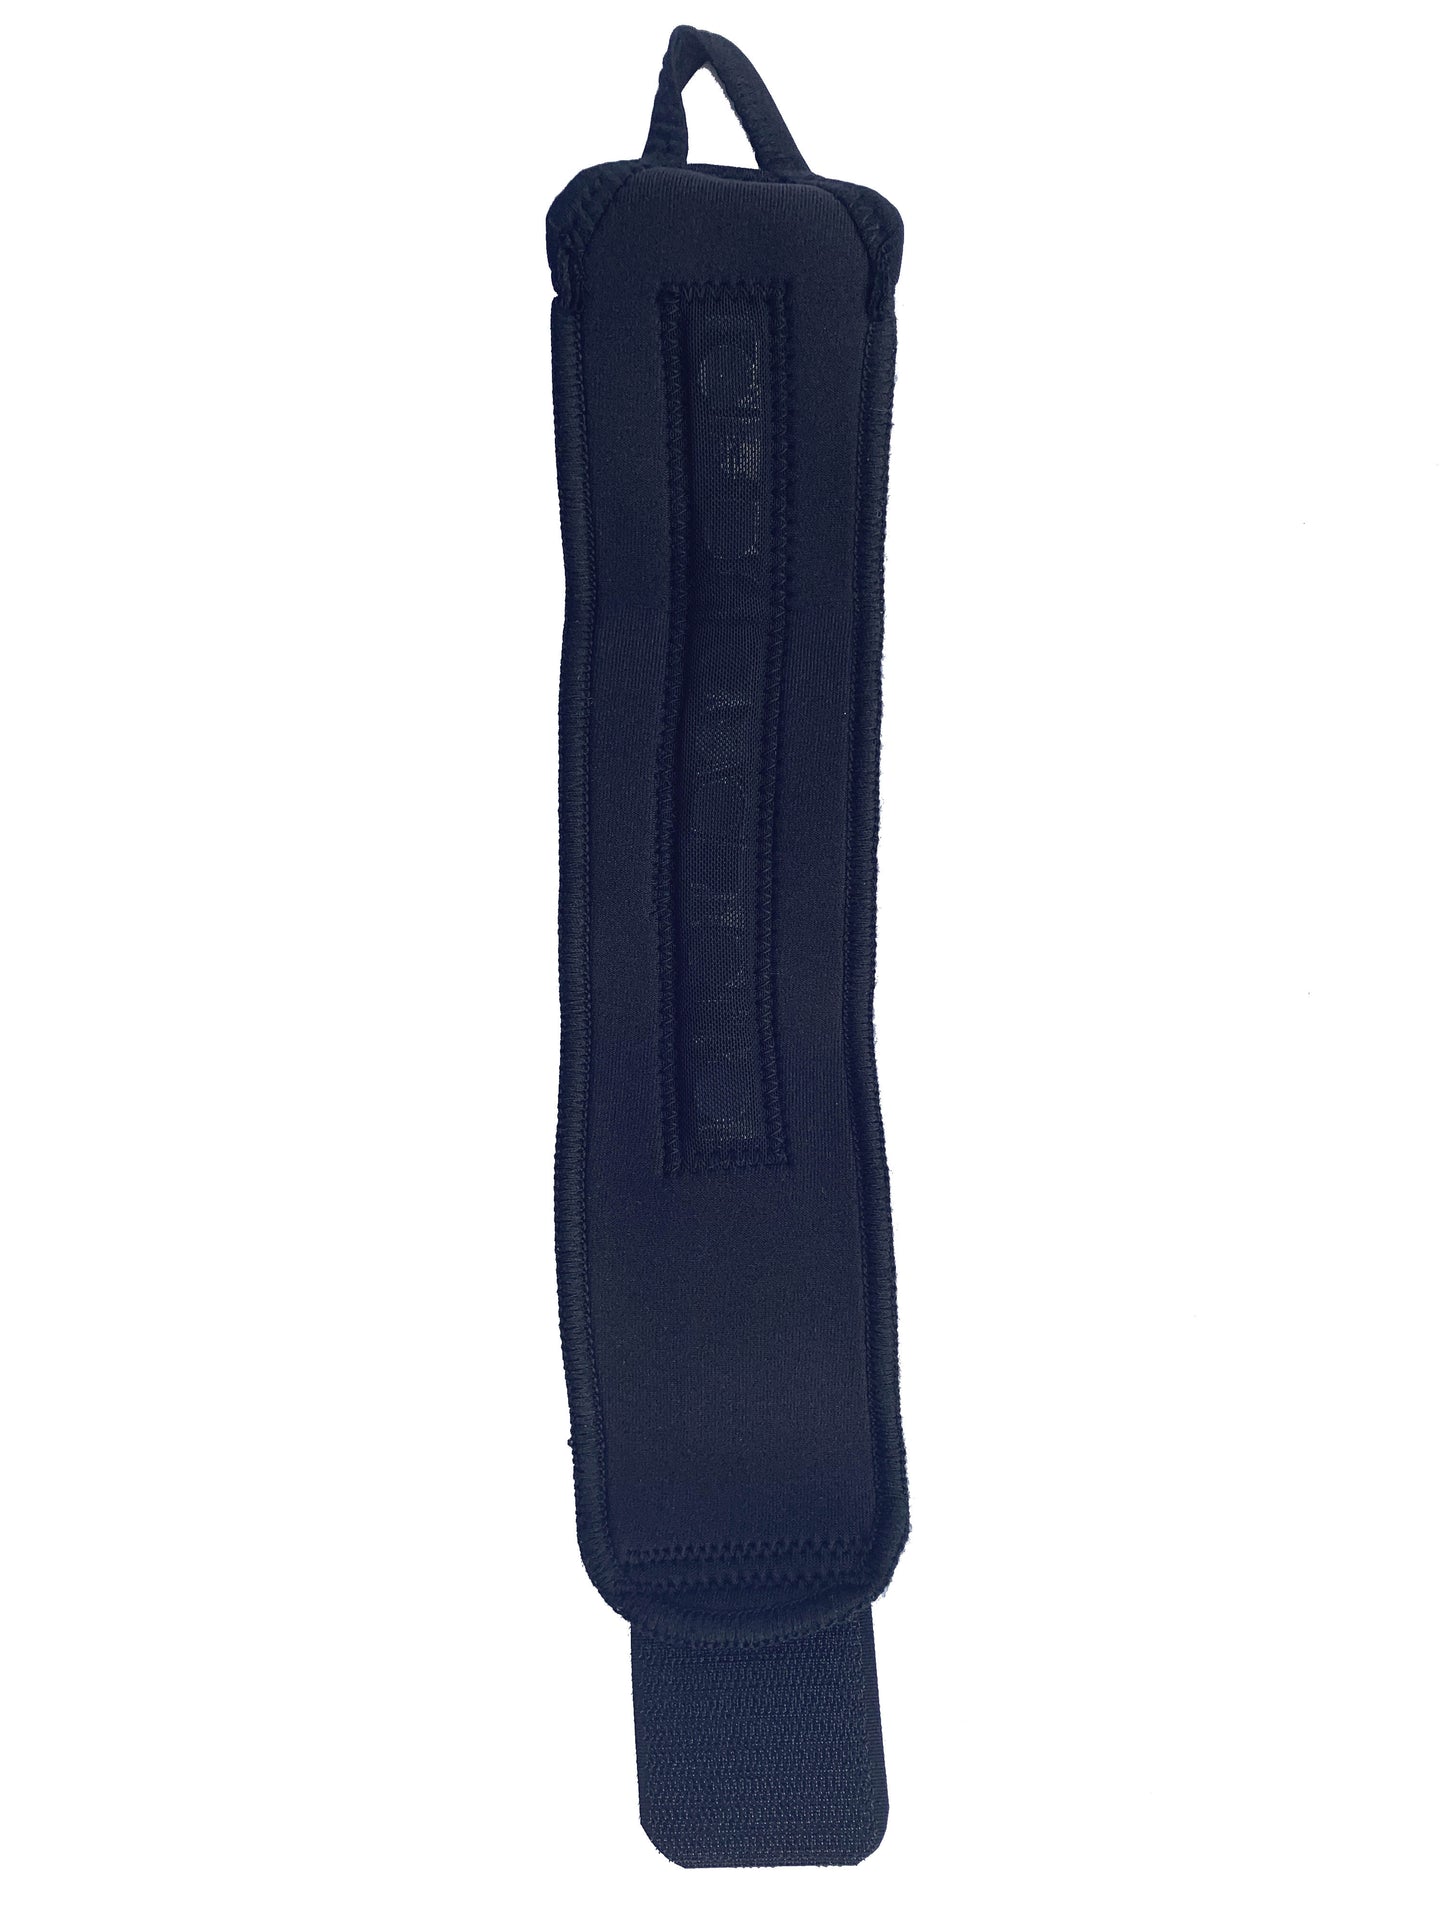 The Bio Magnetic Wrist Support laying flat showing the inside of the support and the embedded 6 therapeutic magnets. 